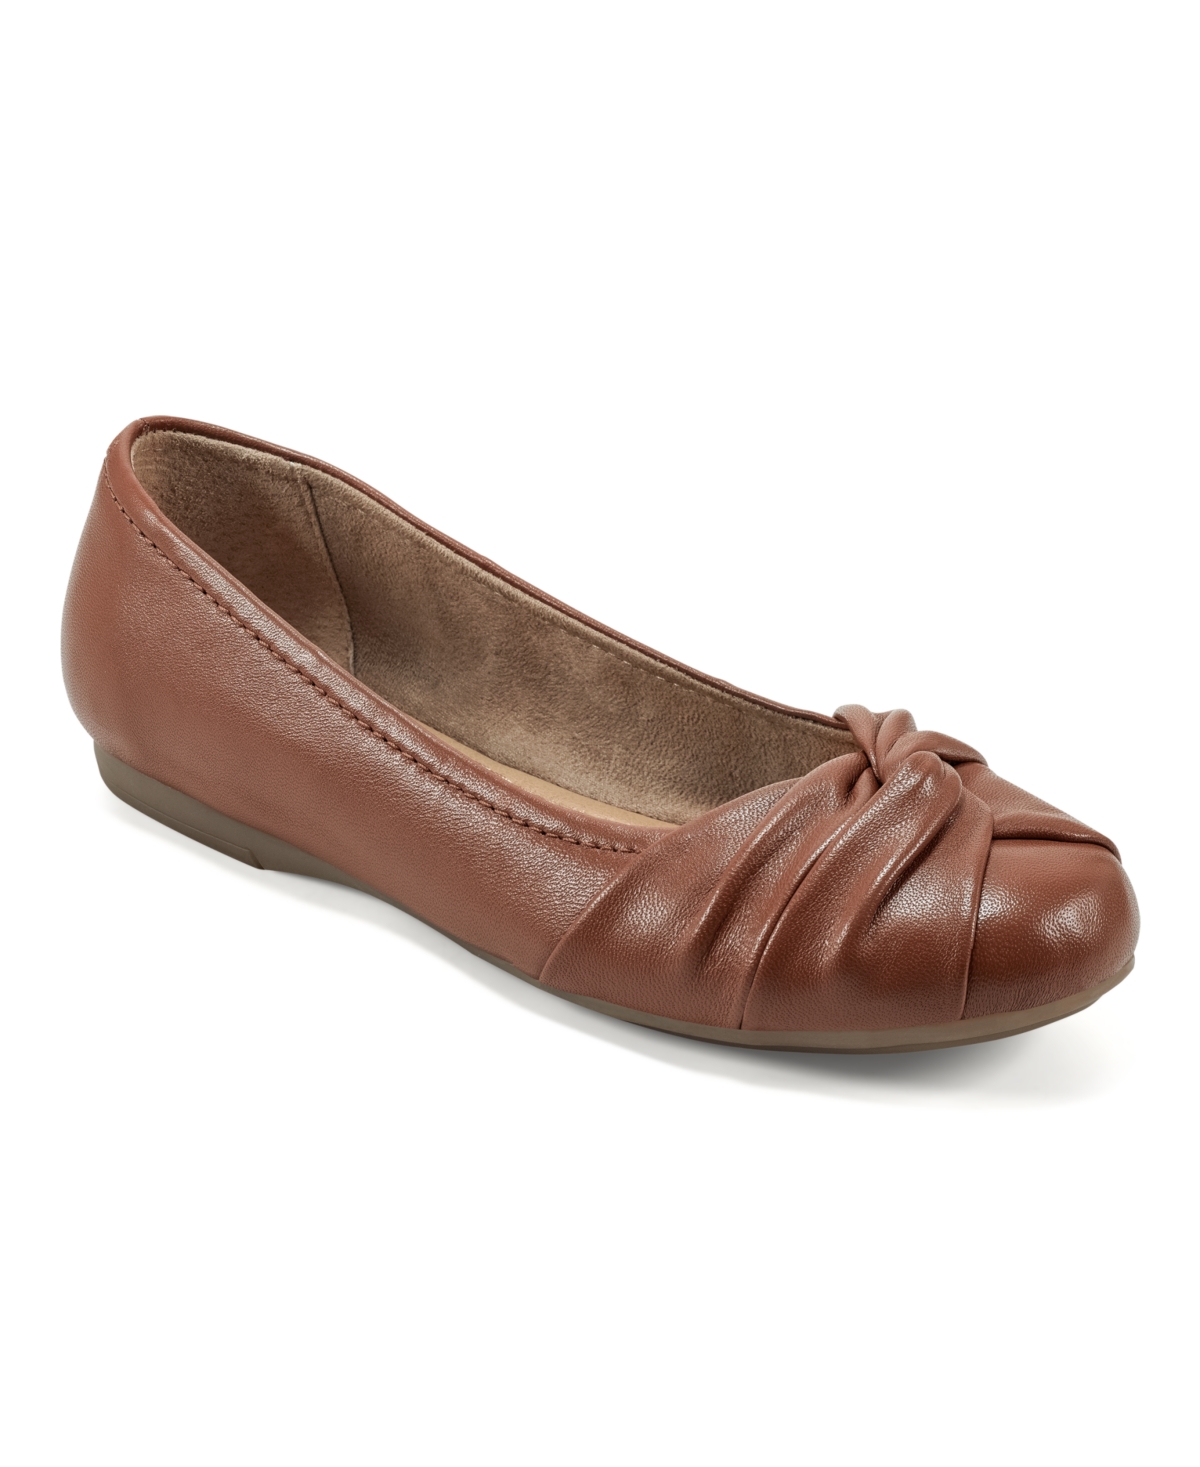 Shop Earth Women's Jacci Lightweight Round Toe Slip-on Dress Flats In Dark Natural Leather